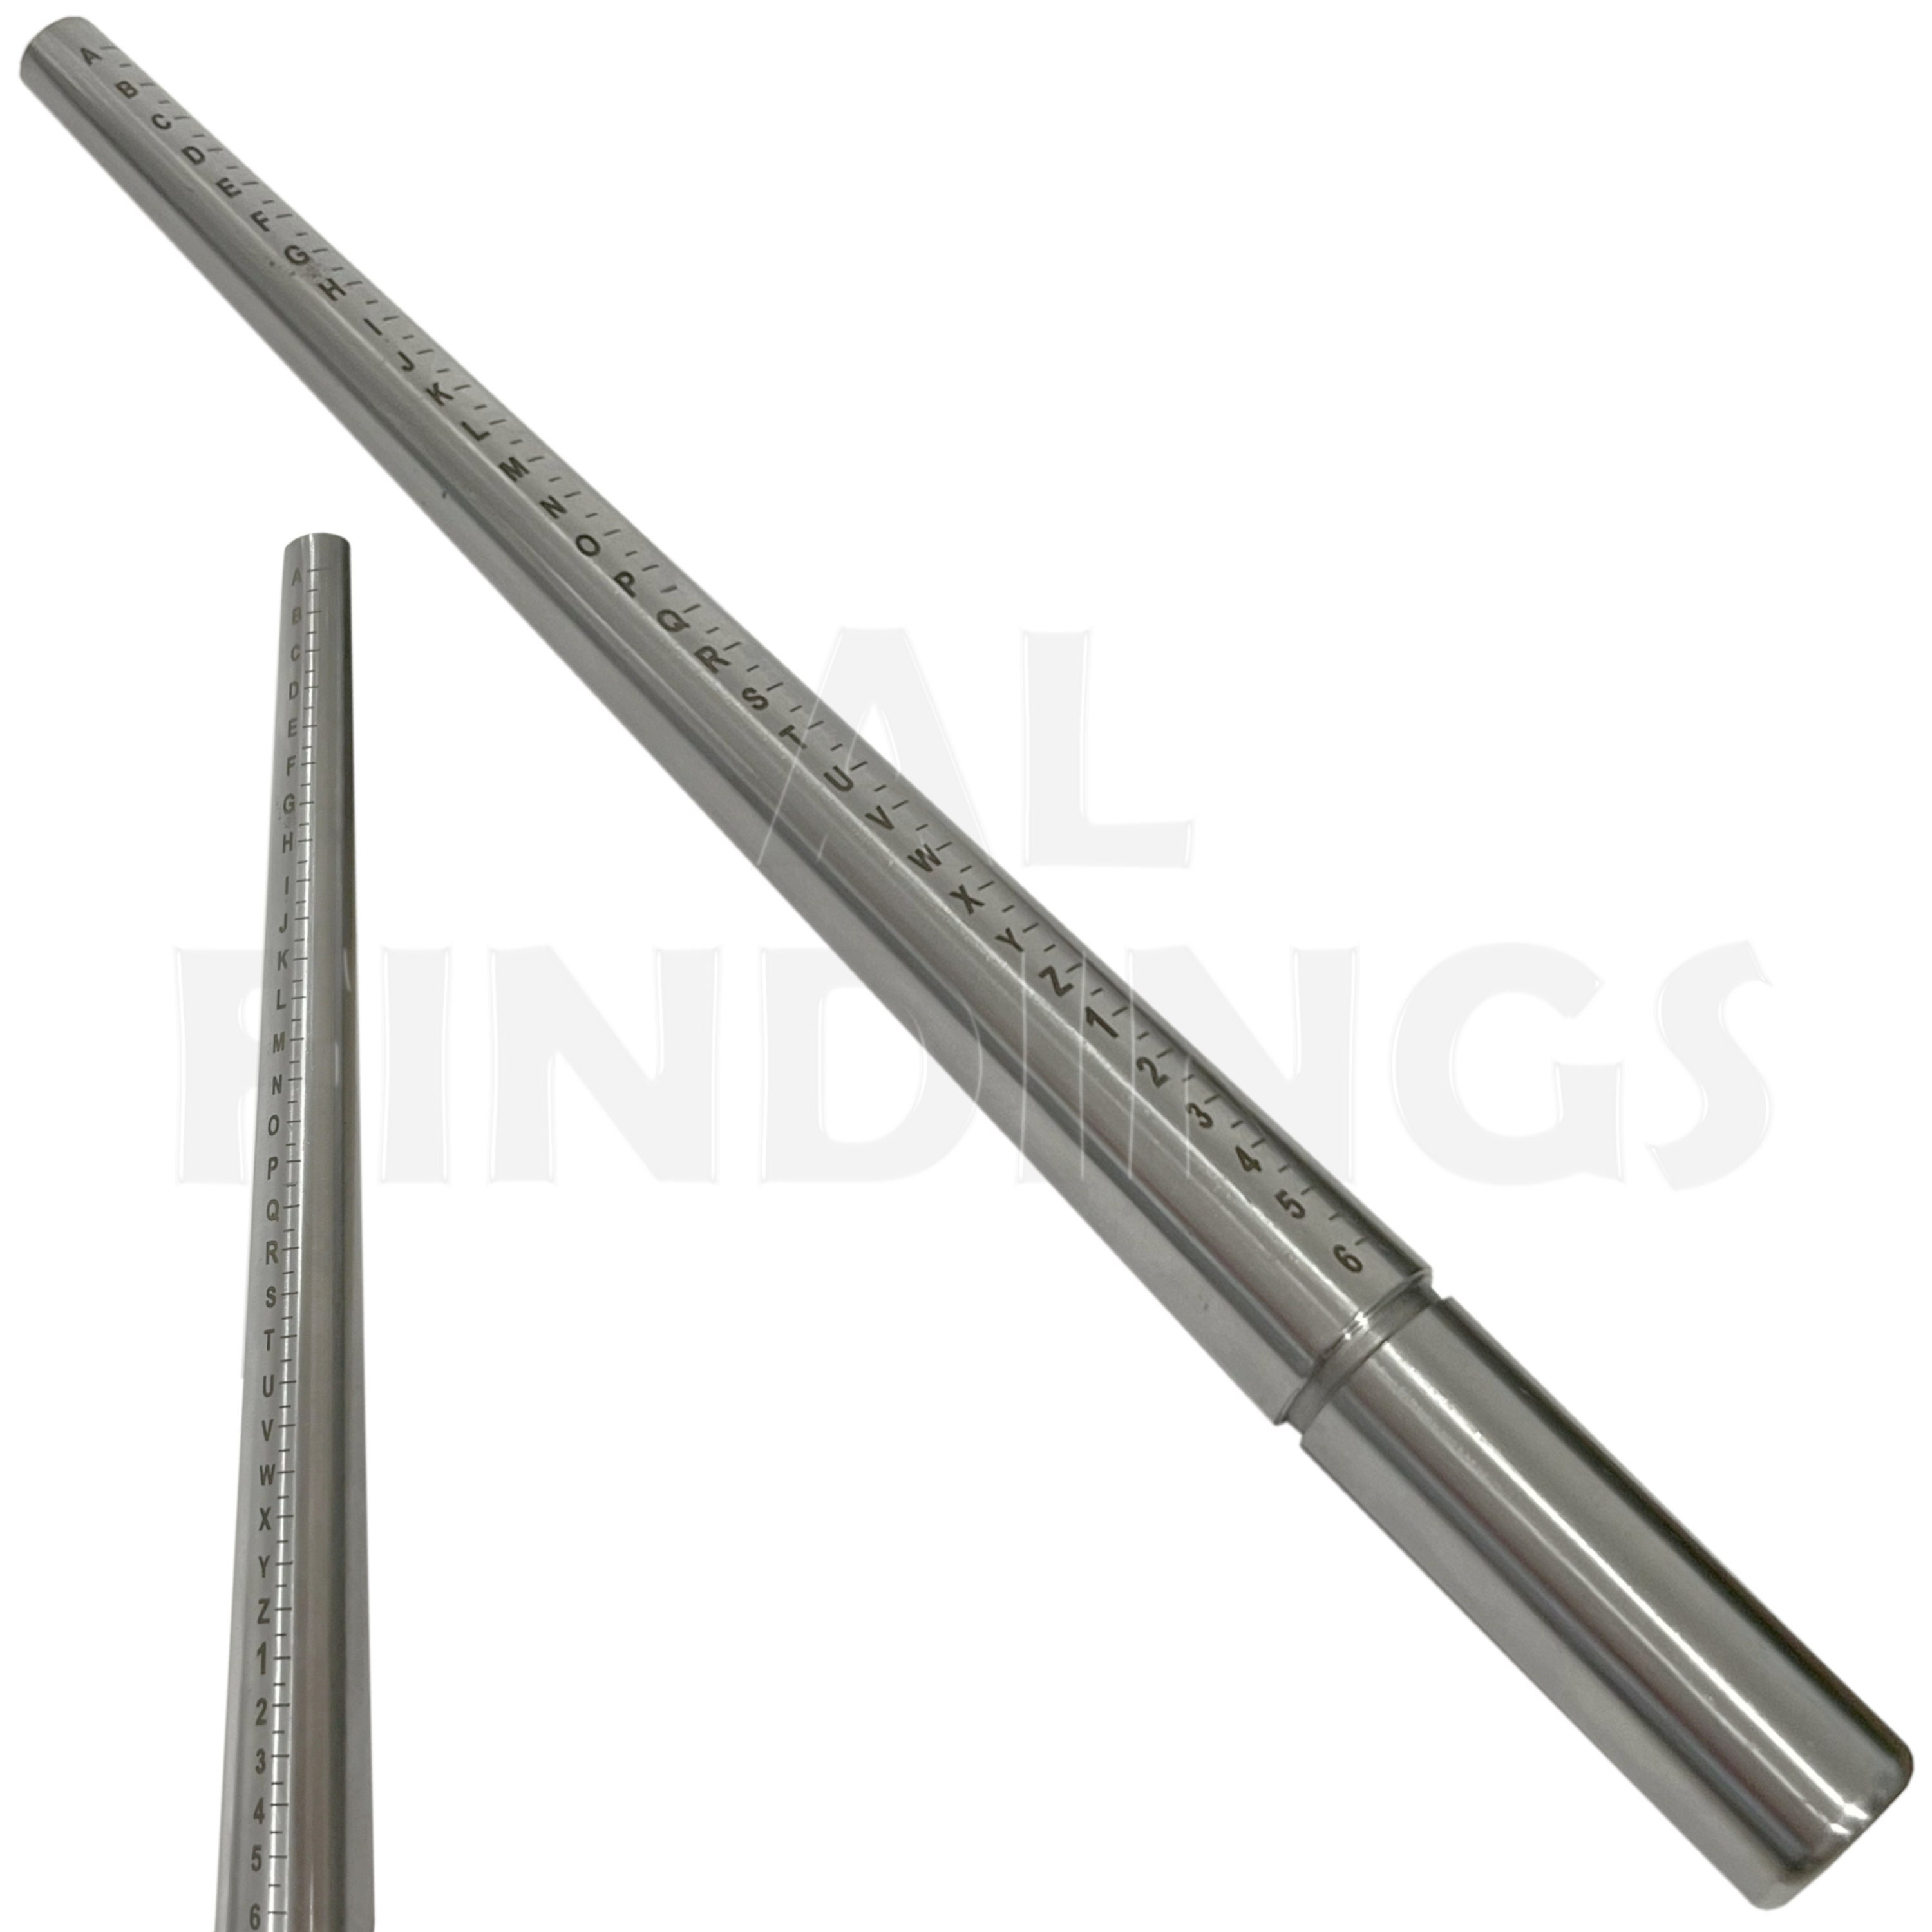 Steel Ungroove Ring Mandrel for Ring Making, Sizing, Shaping and Forming  Size US 0-15 Gauge Stick Sizer Jewelry 